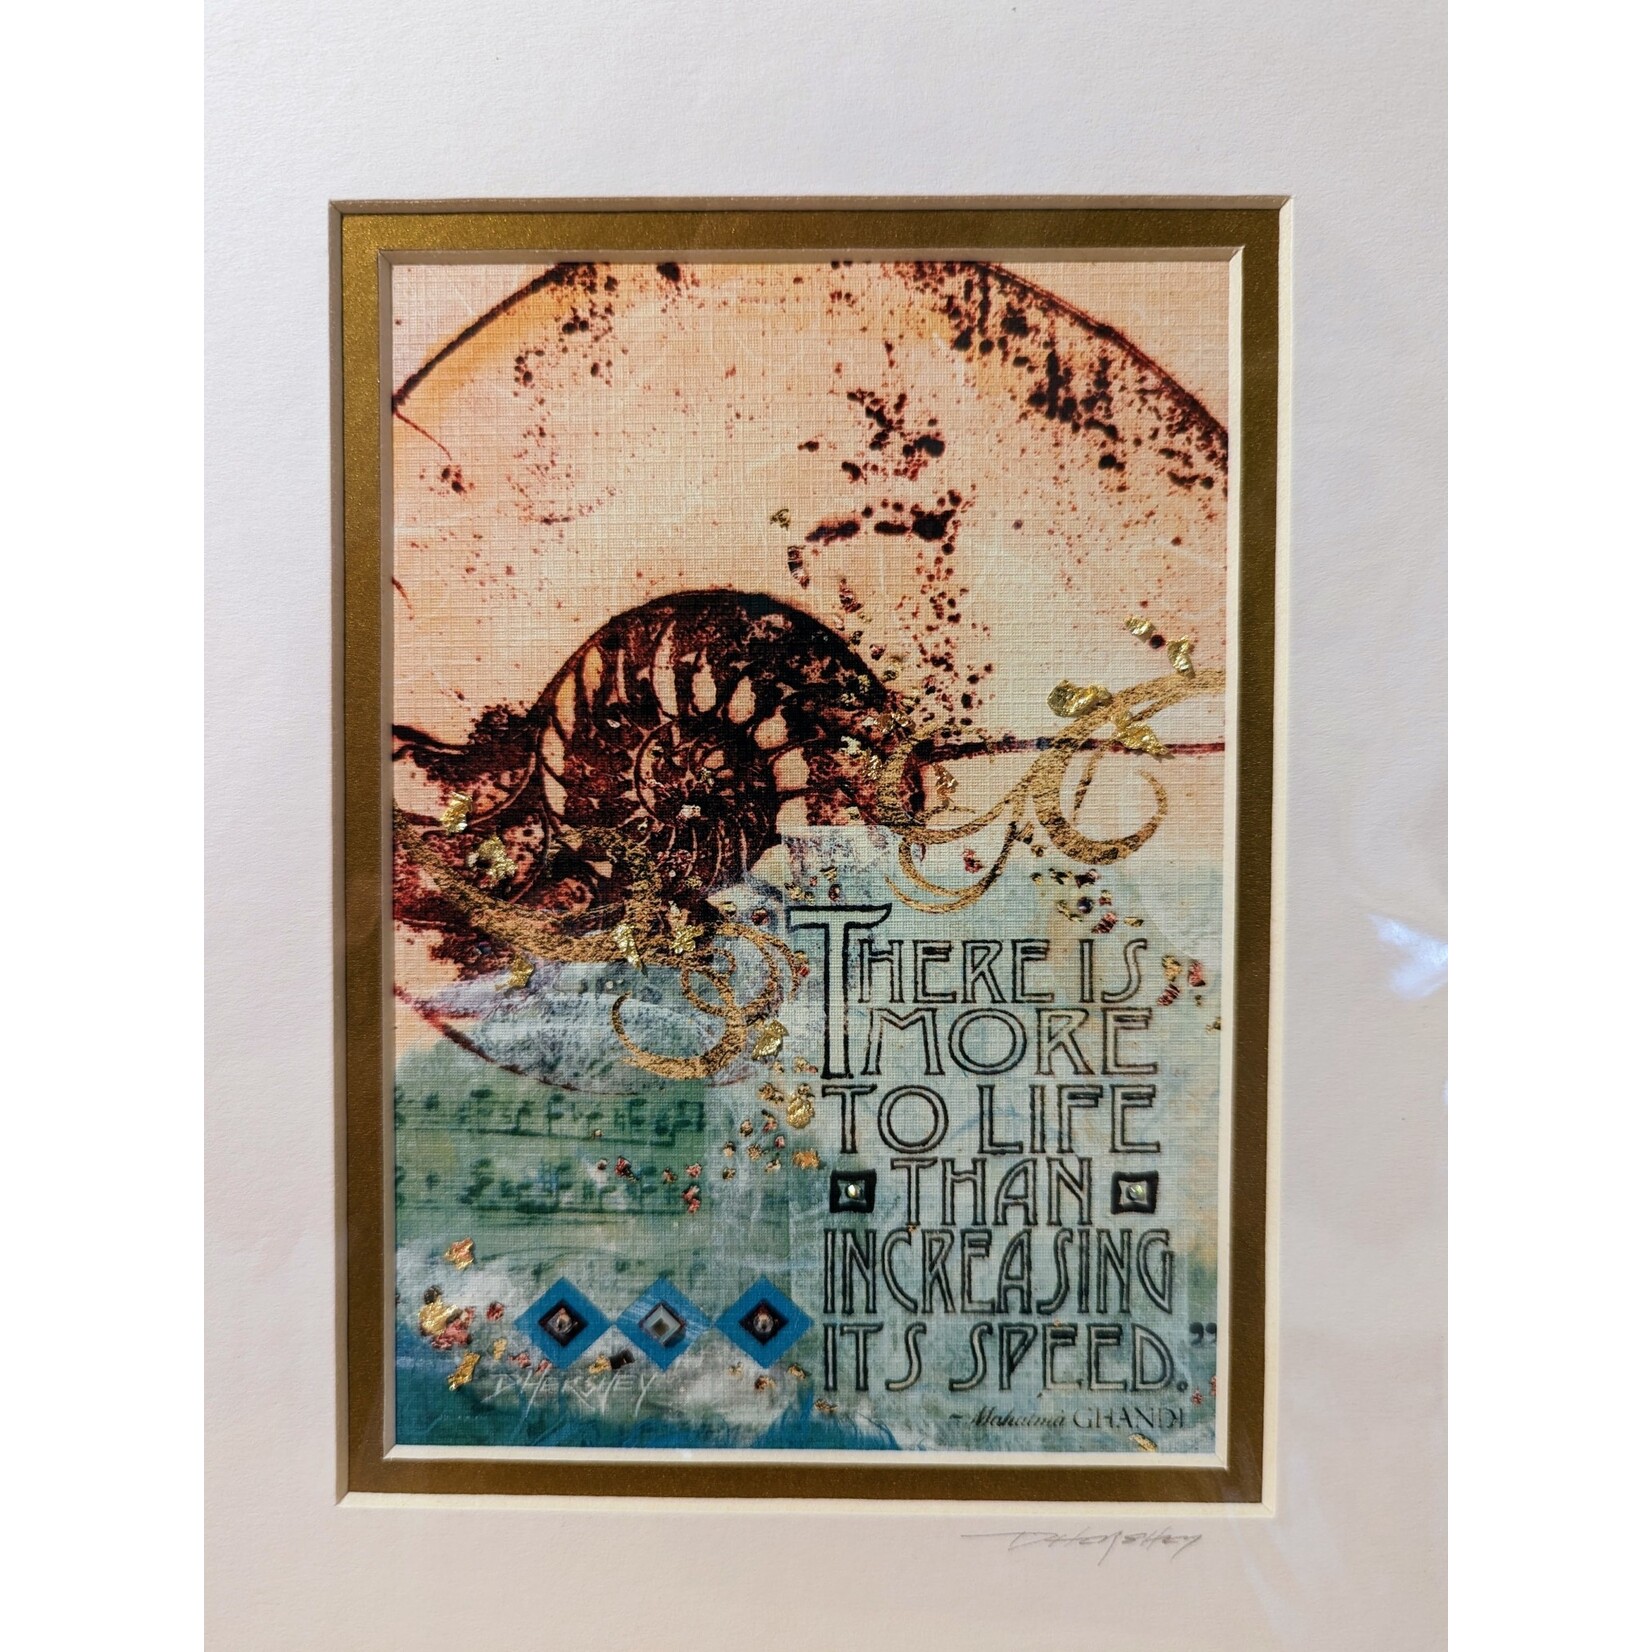 Deborah Hershey Designs "There is More to Life Than Increasing Its Speed" - matted print